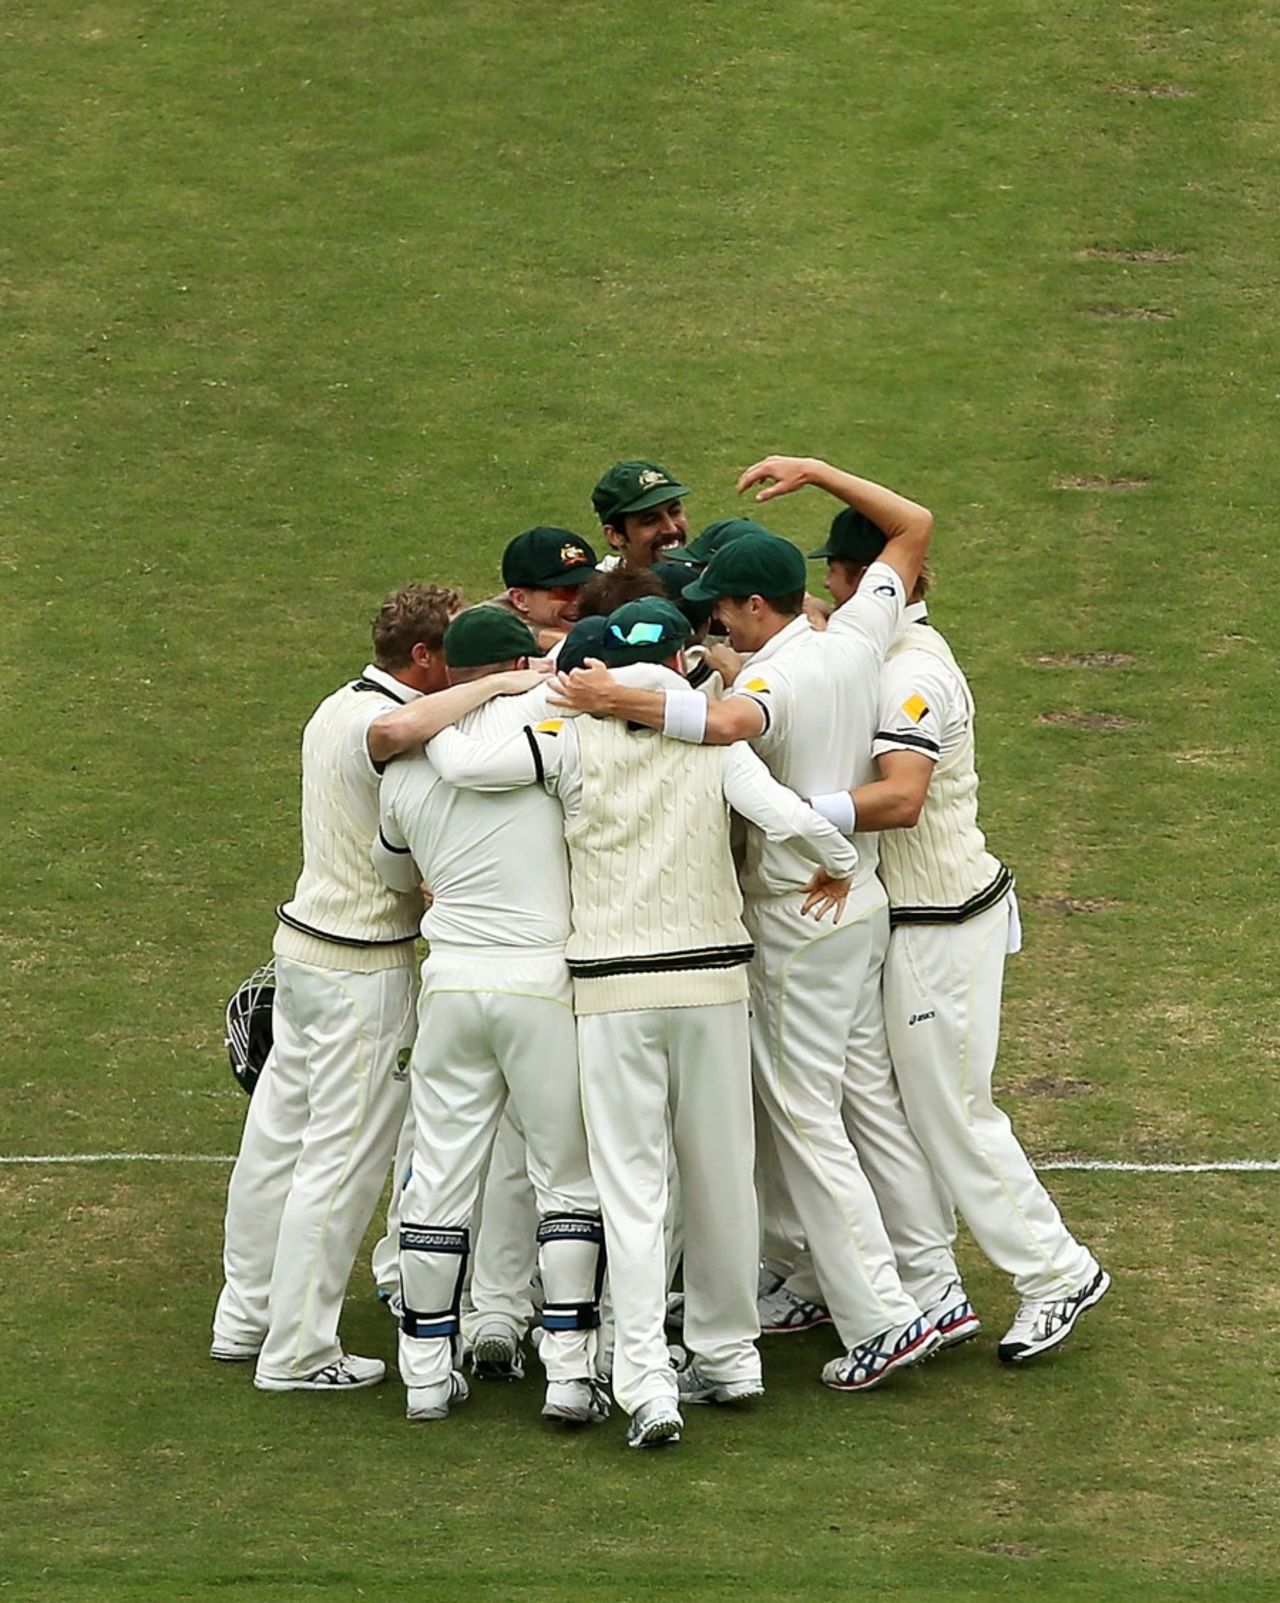 The Australians celebrate after going 2-0 up in the series, Australia v England, 2nd Test, Adelaide, 5th day, December 9, 2013